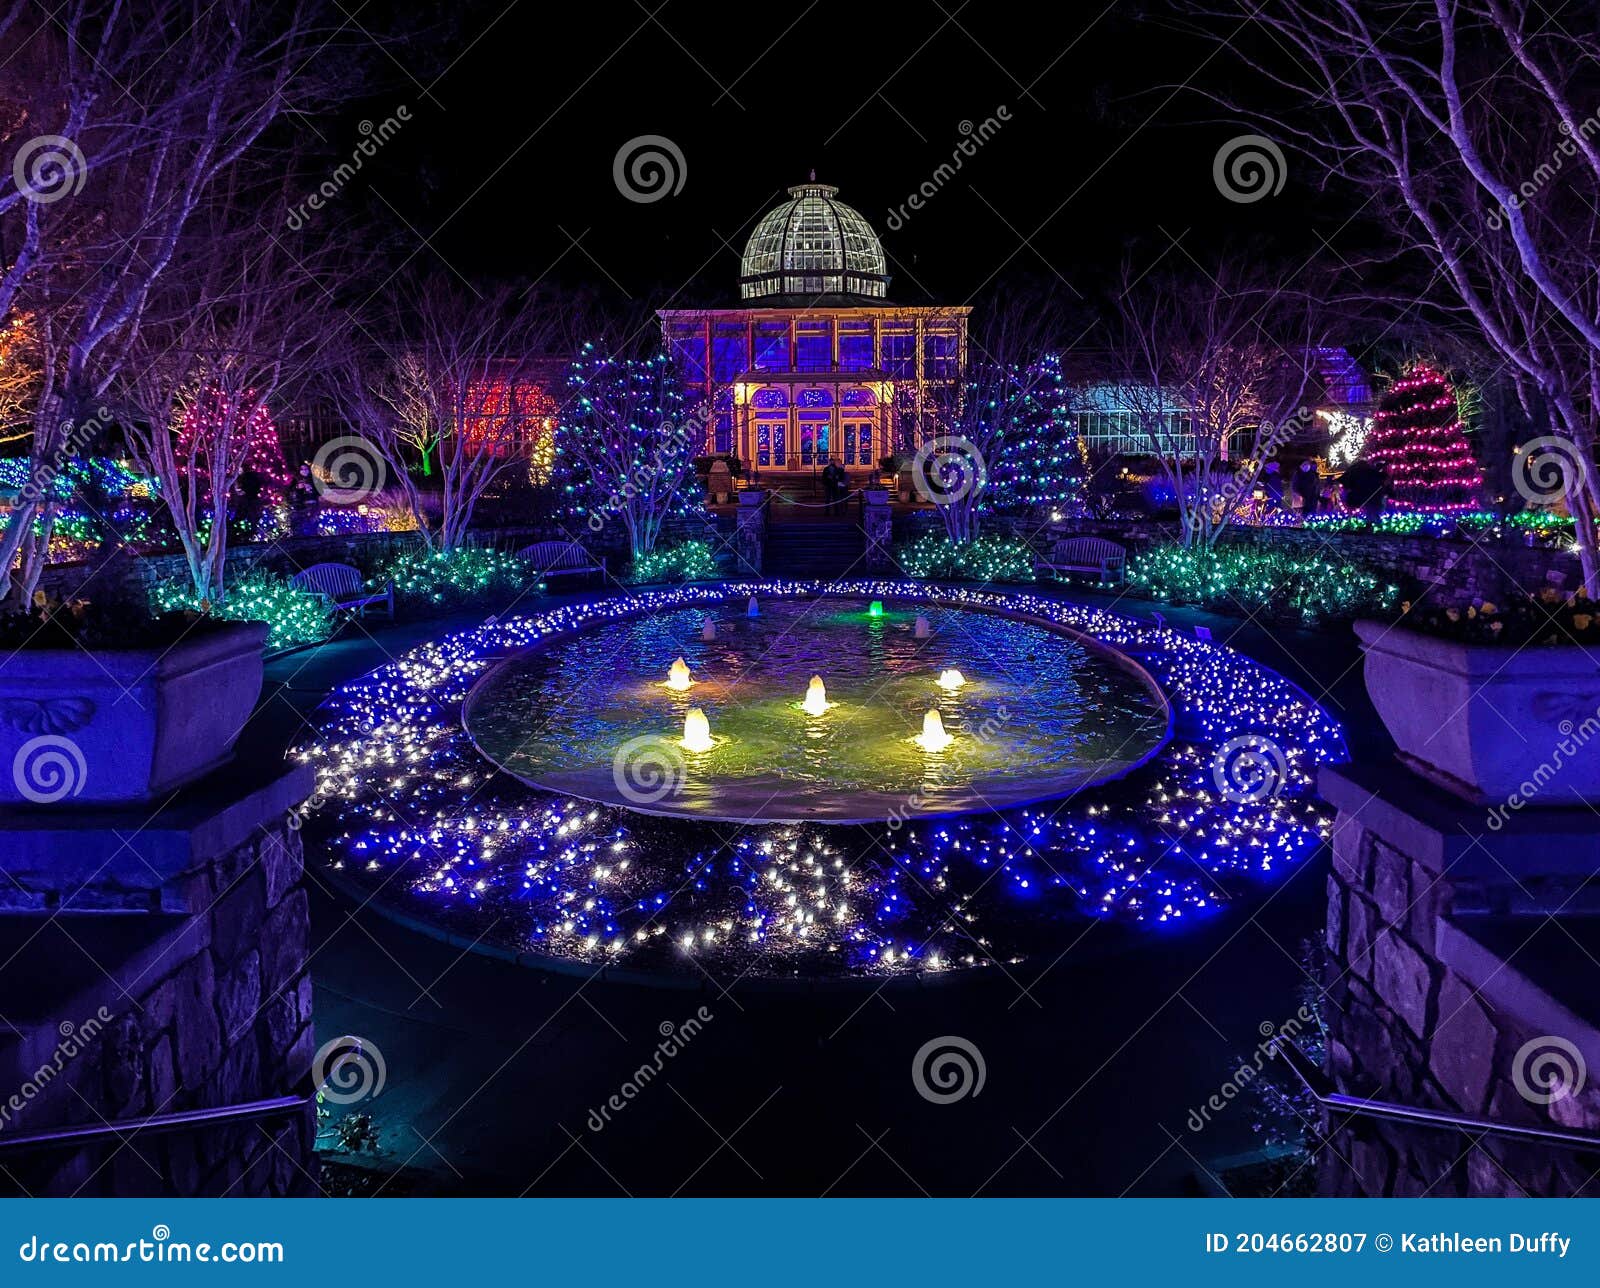 botanical garden lit bright for the holiday